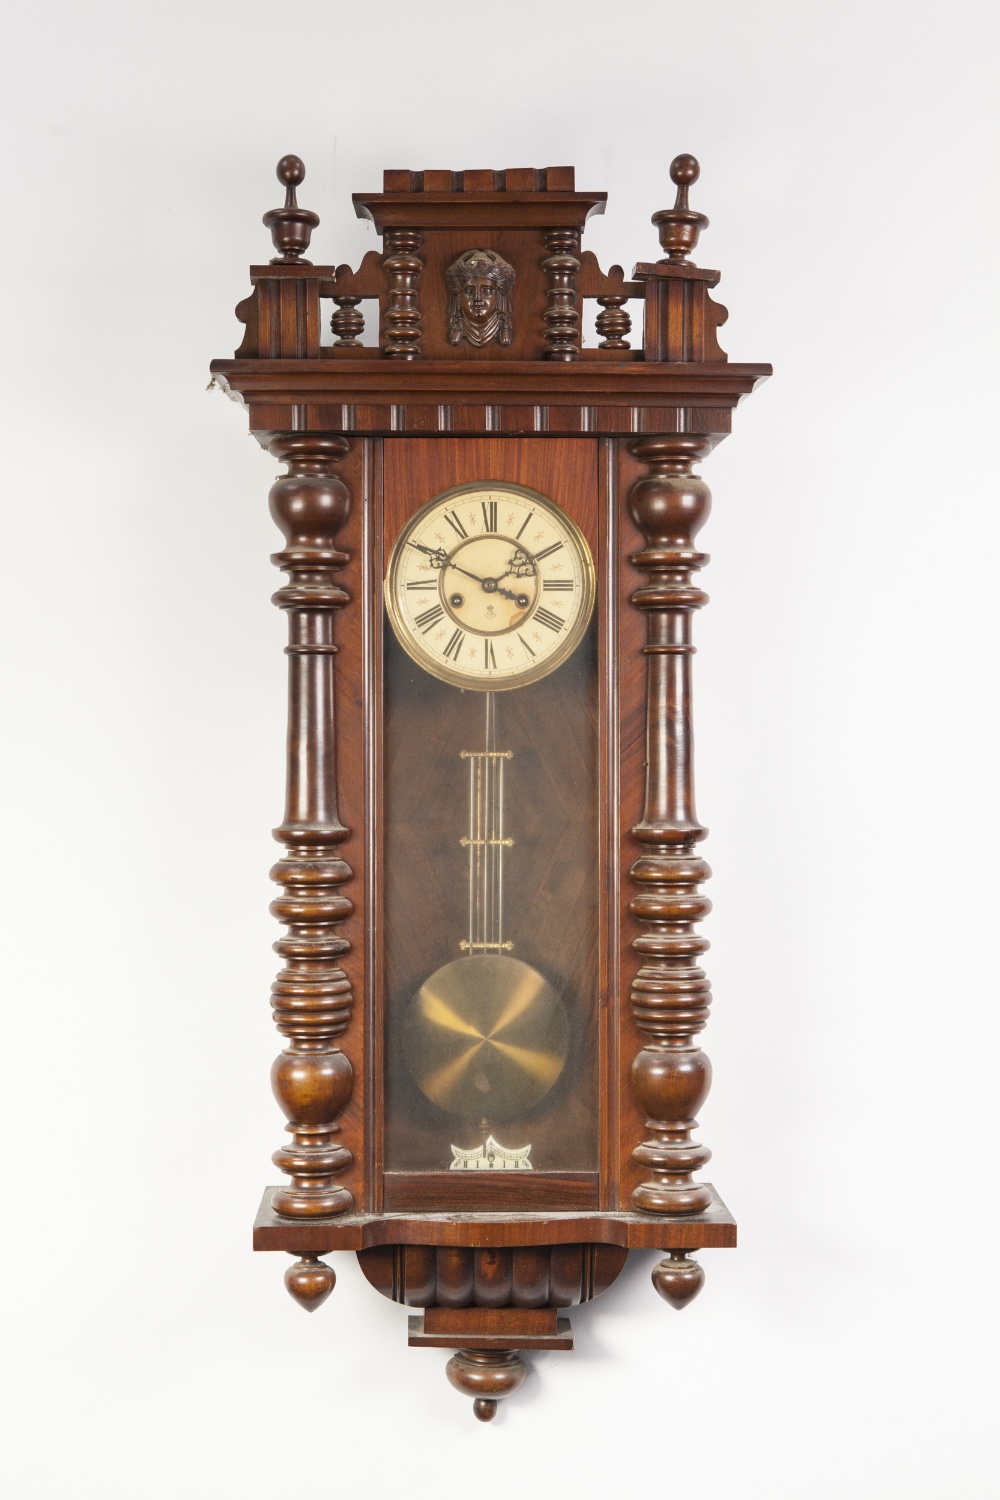 AN EARLY TWENTIETH CENTURY SPRING DRIVEN VIENNA WALL CLOCK BY GUSTAV BECKER, of typical from with 7"